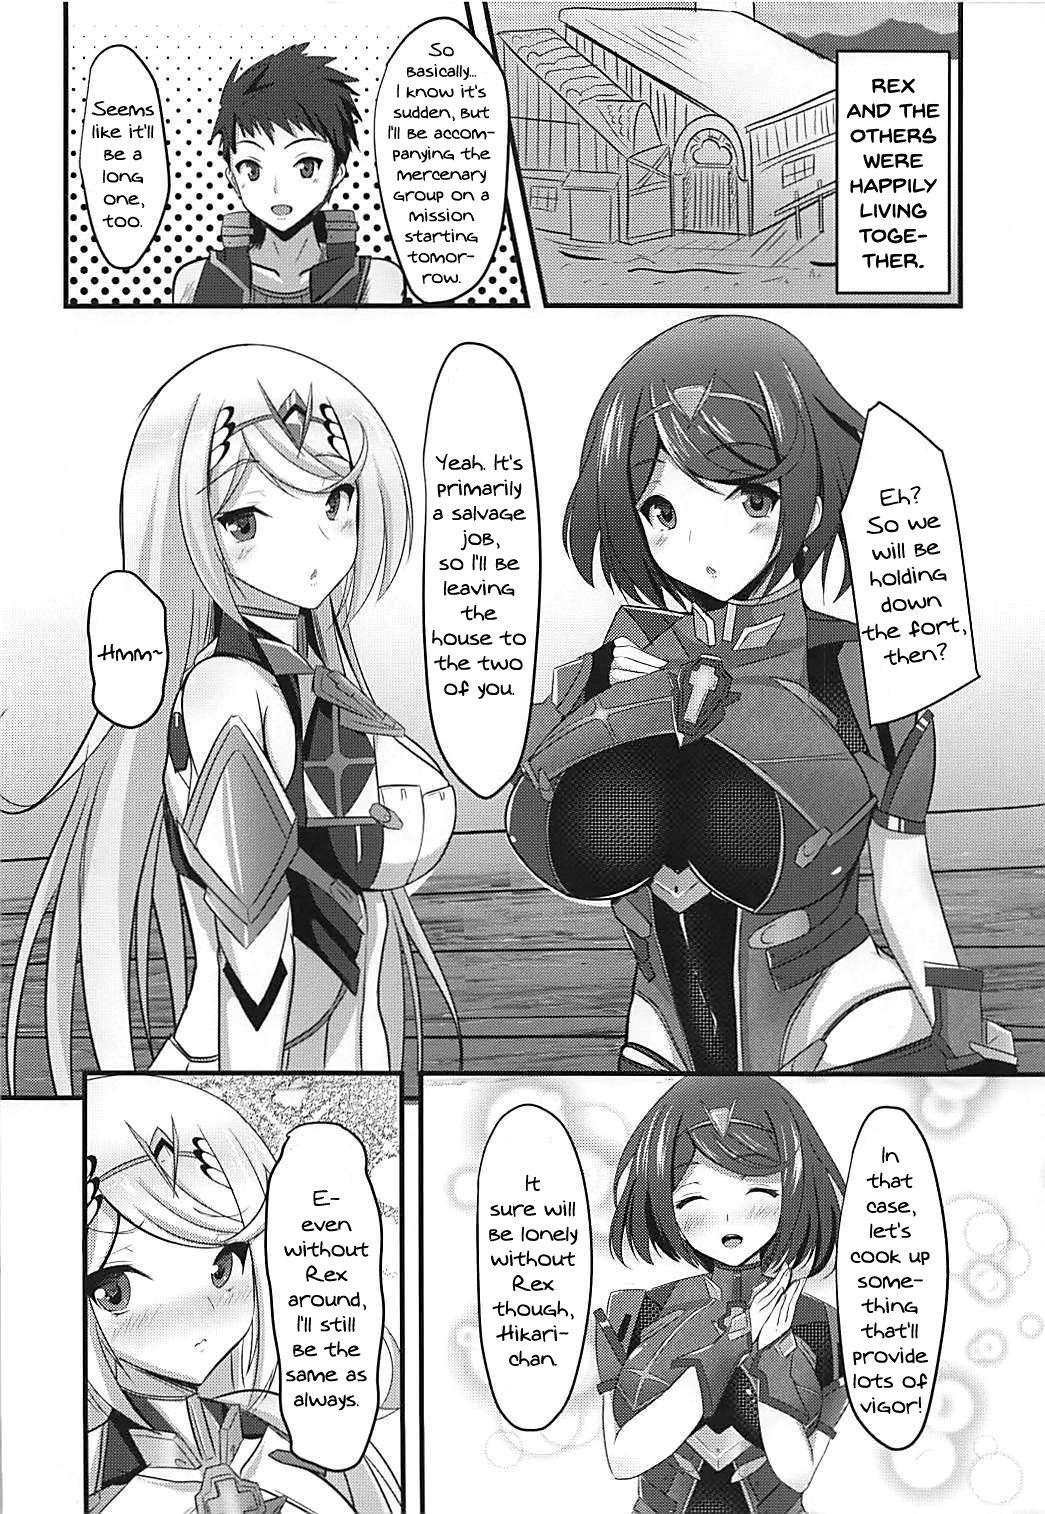 Joven HOMUHIKAex - Xenoblade chronicles 2 Shemale Sex - Page 3